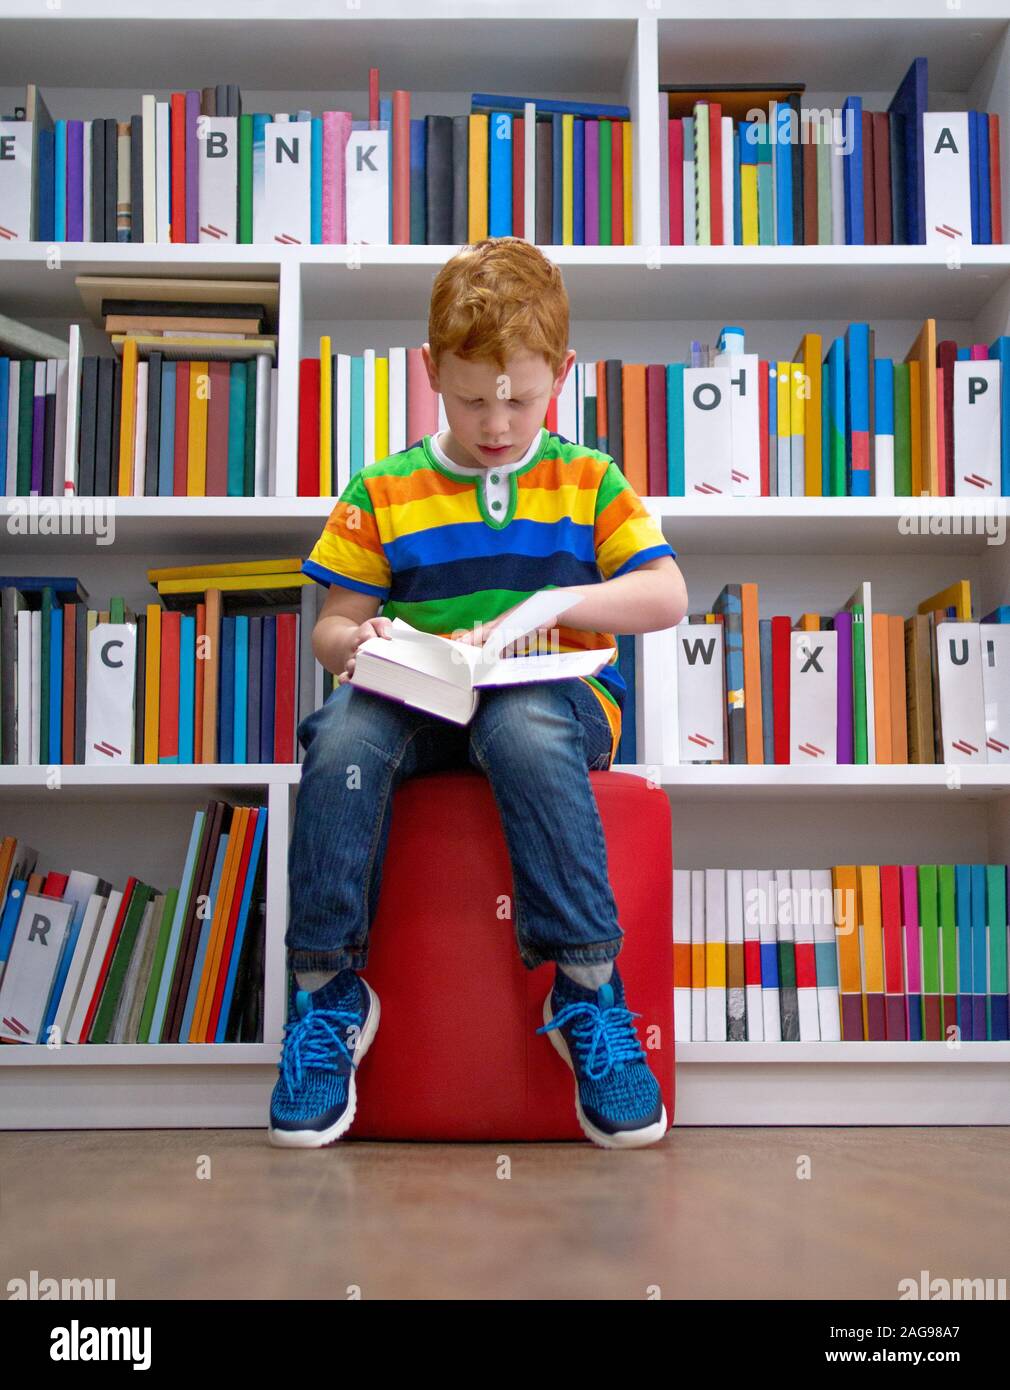 Adorable red-haired little boy, sitting in a library, reading book. Knowledge, education, getting ready for school. Multi colored bookshelf in the lib Stock Photo